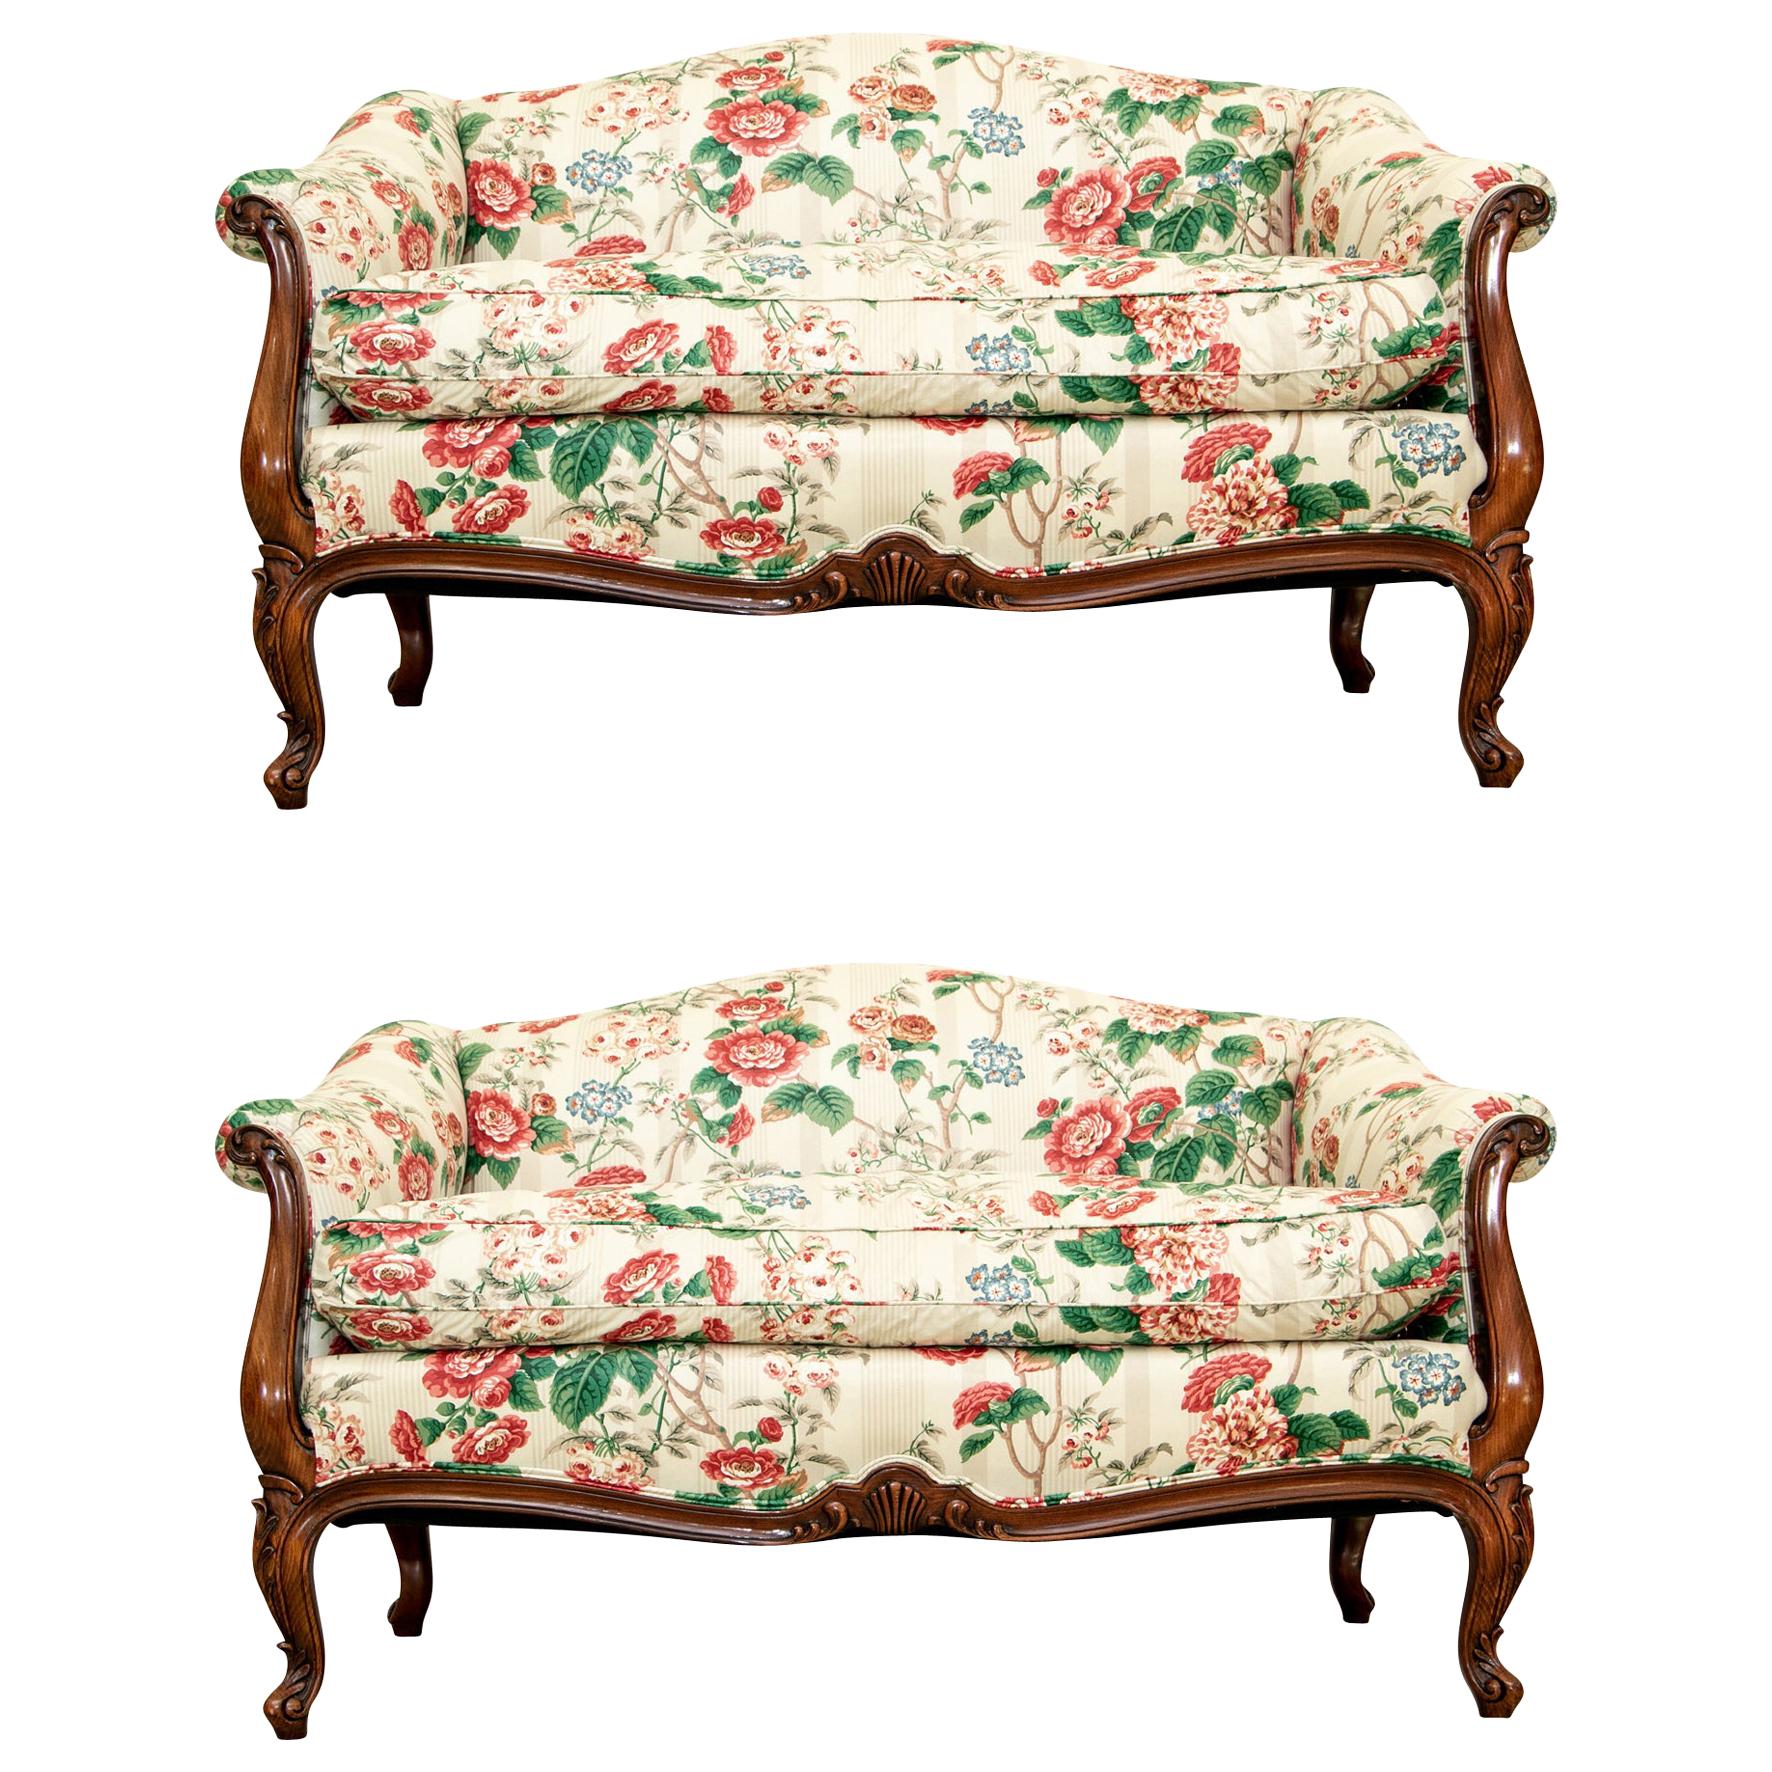 Very Fine Pair of French Style Vintage Love Seats in a Custom Floral Chintz Fabr